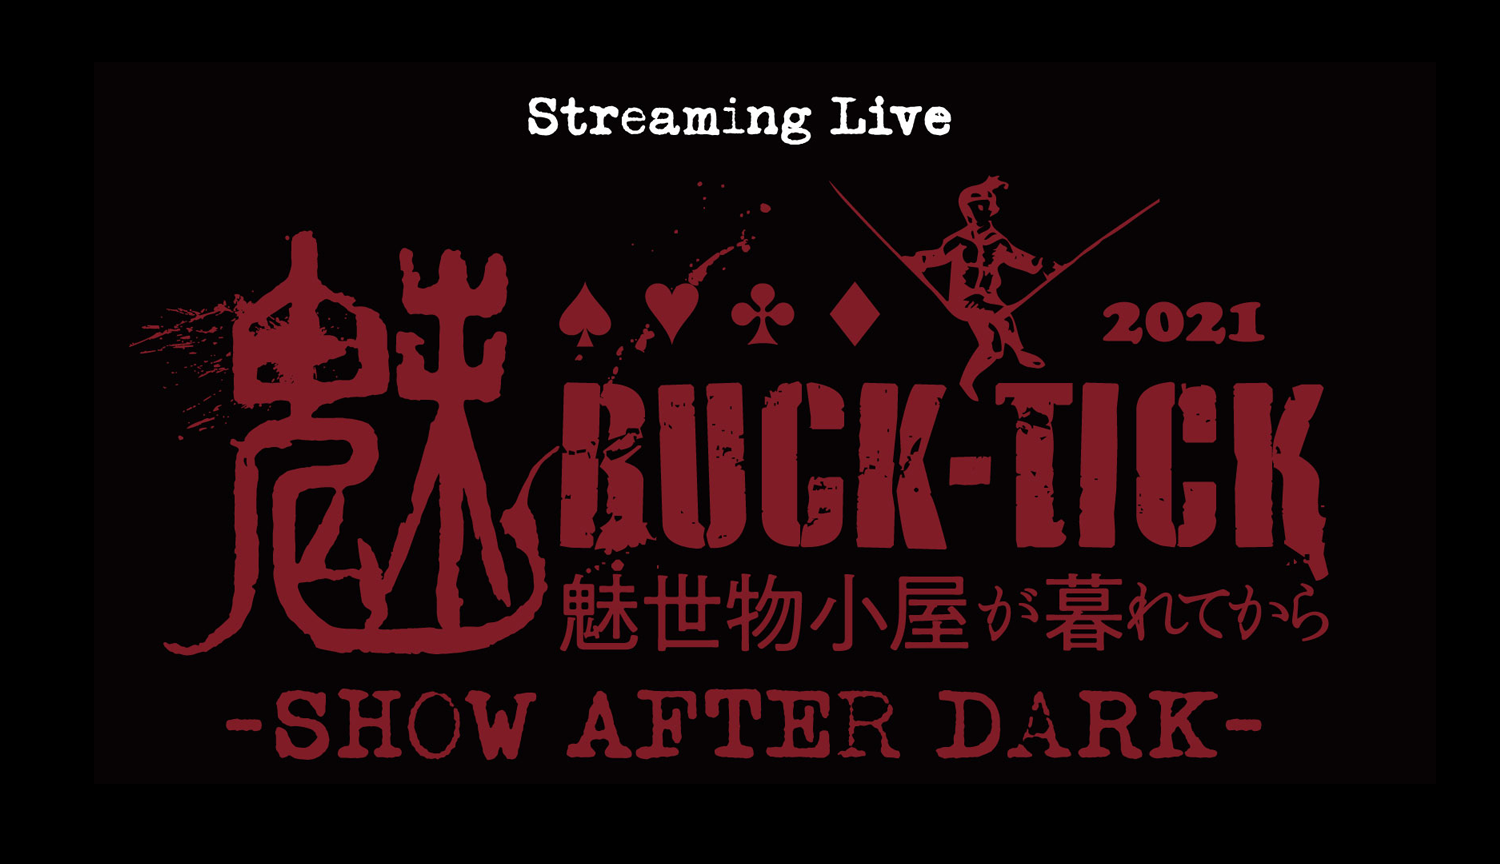 STREAMING SHOW AFTER DARK